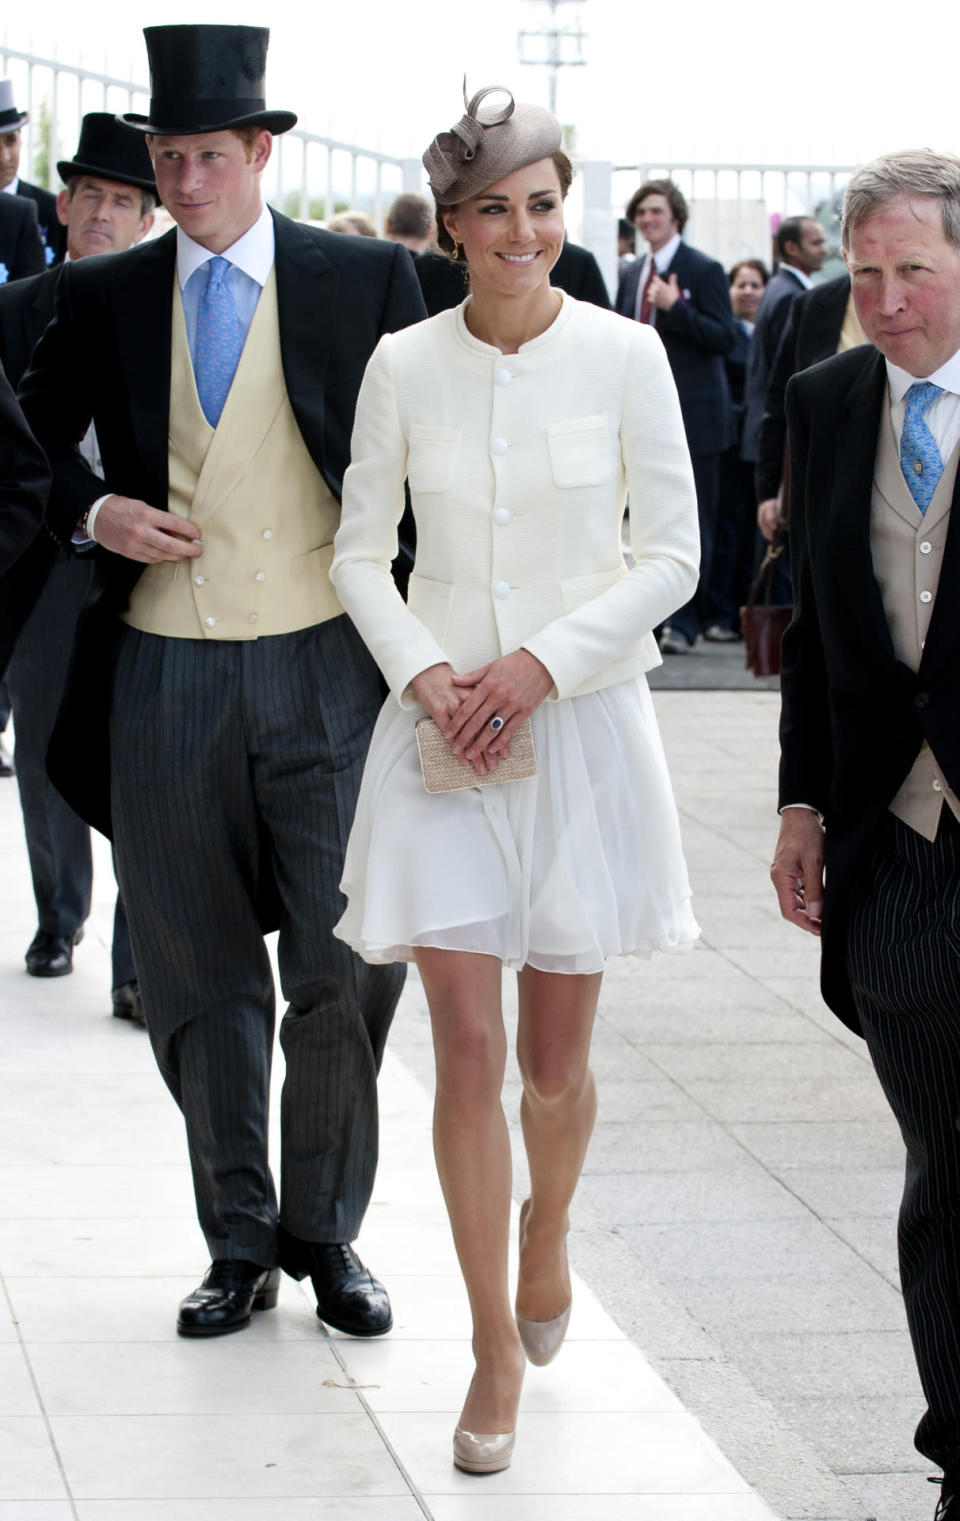 <p>Kate chose a white Reiss look for the Epsom Derby and a white tweed jacket by Joseph. She accessorised with nude heels and clutch by L.K. Bennett.</p><p><i>[Photo: PA]</i></p>